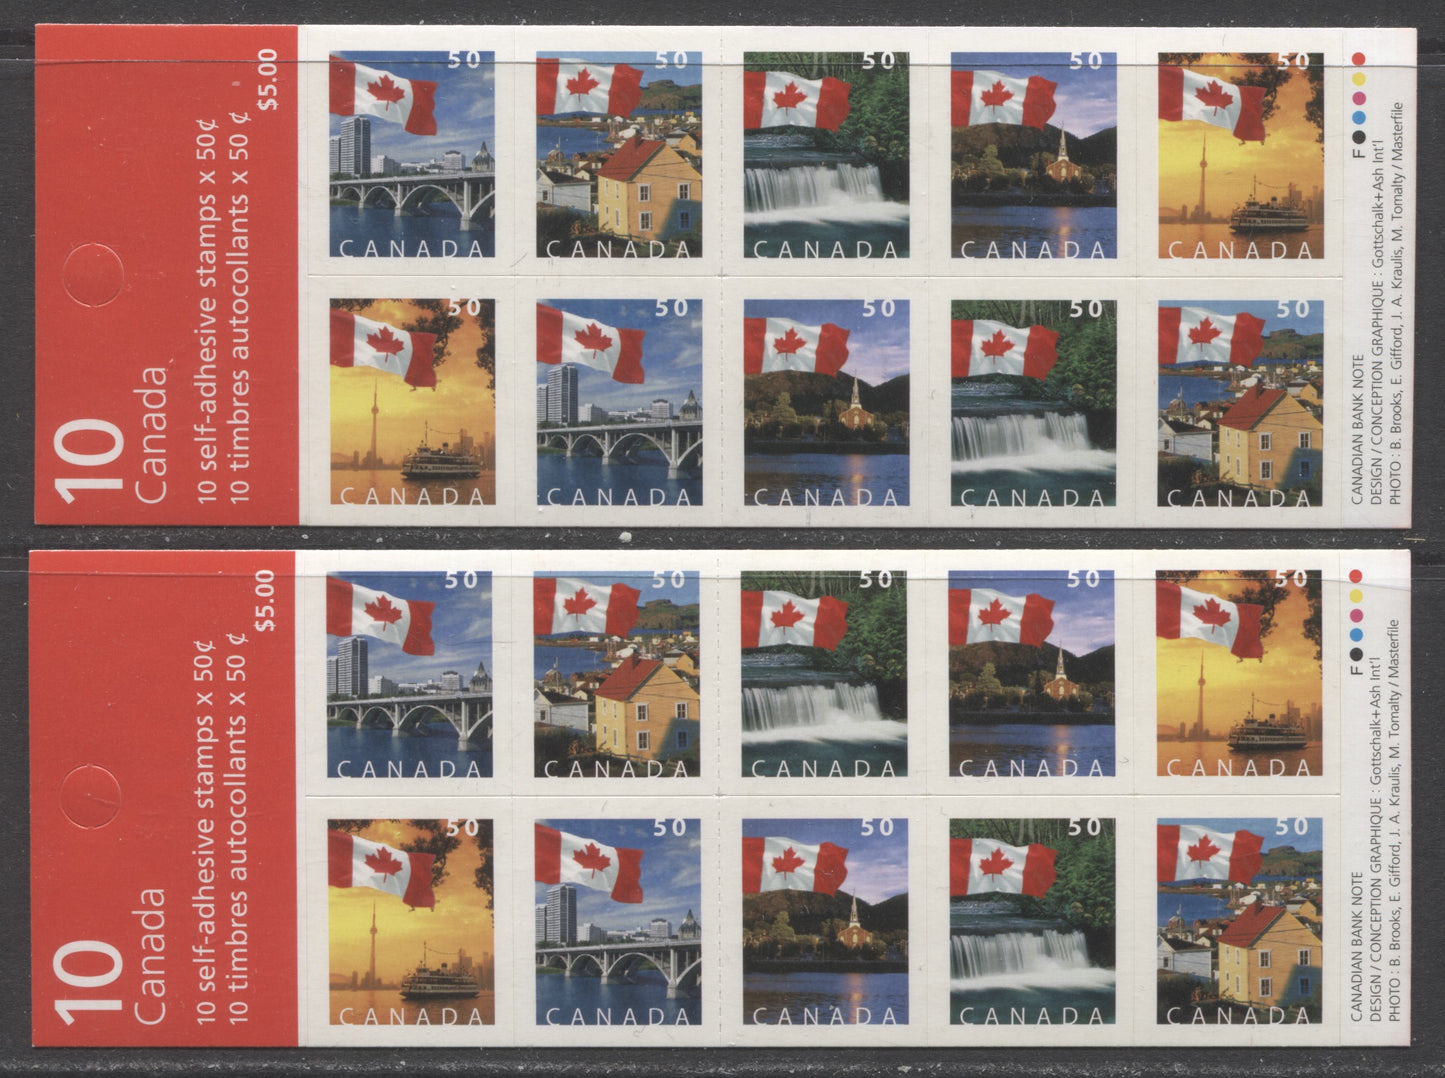 Lot 32 Canada #BK302Aa 50c Multicolored Flags Over Scenes, 2004-2005 Definitive Issues, 2 VFNH Booklets Of 10 With 29 Slit Roulette, Fasson Paper, HF Cover Types NA & QB $24